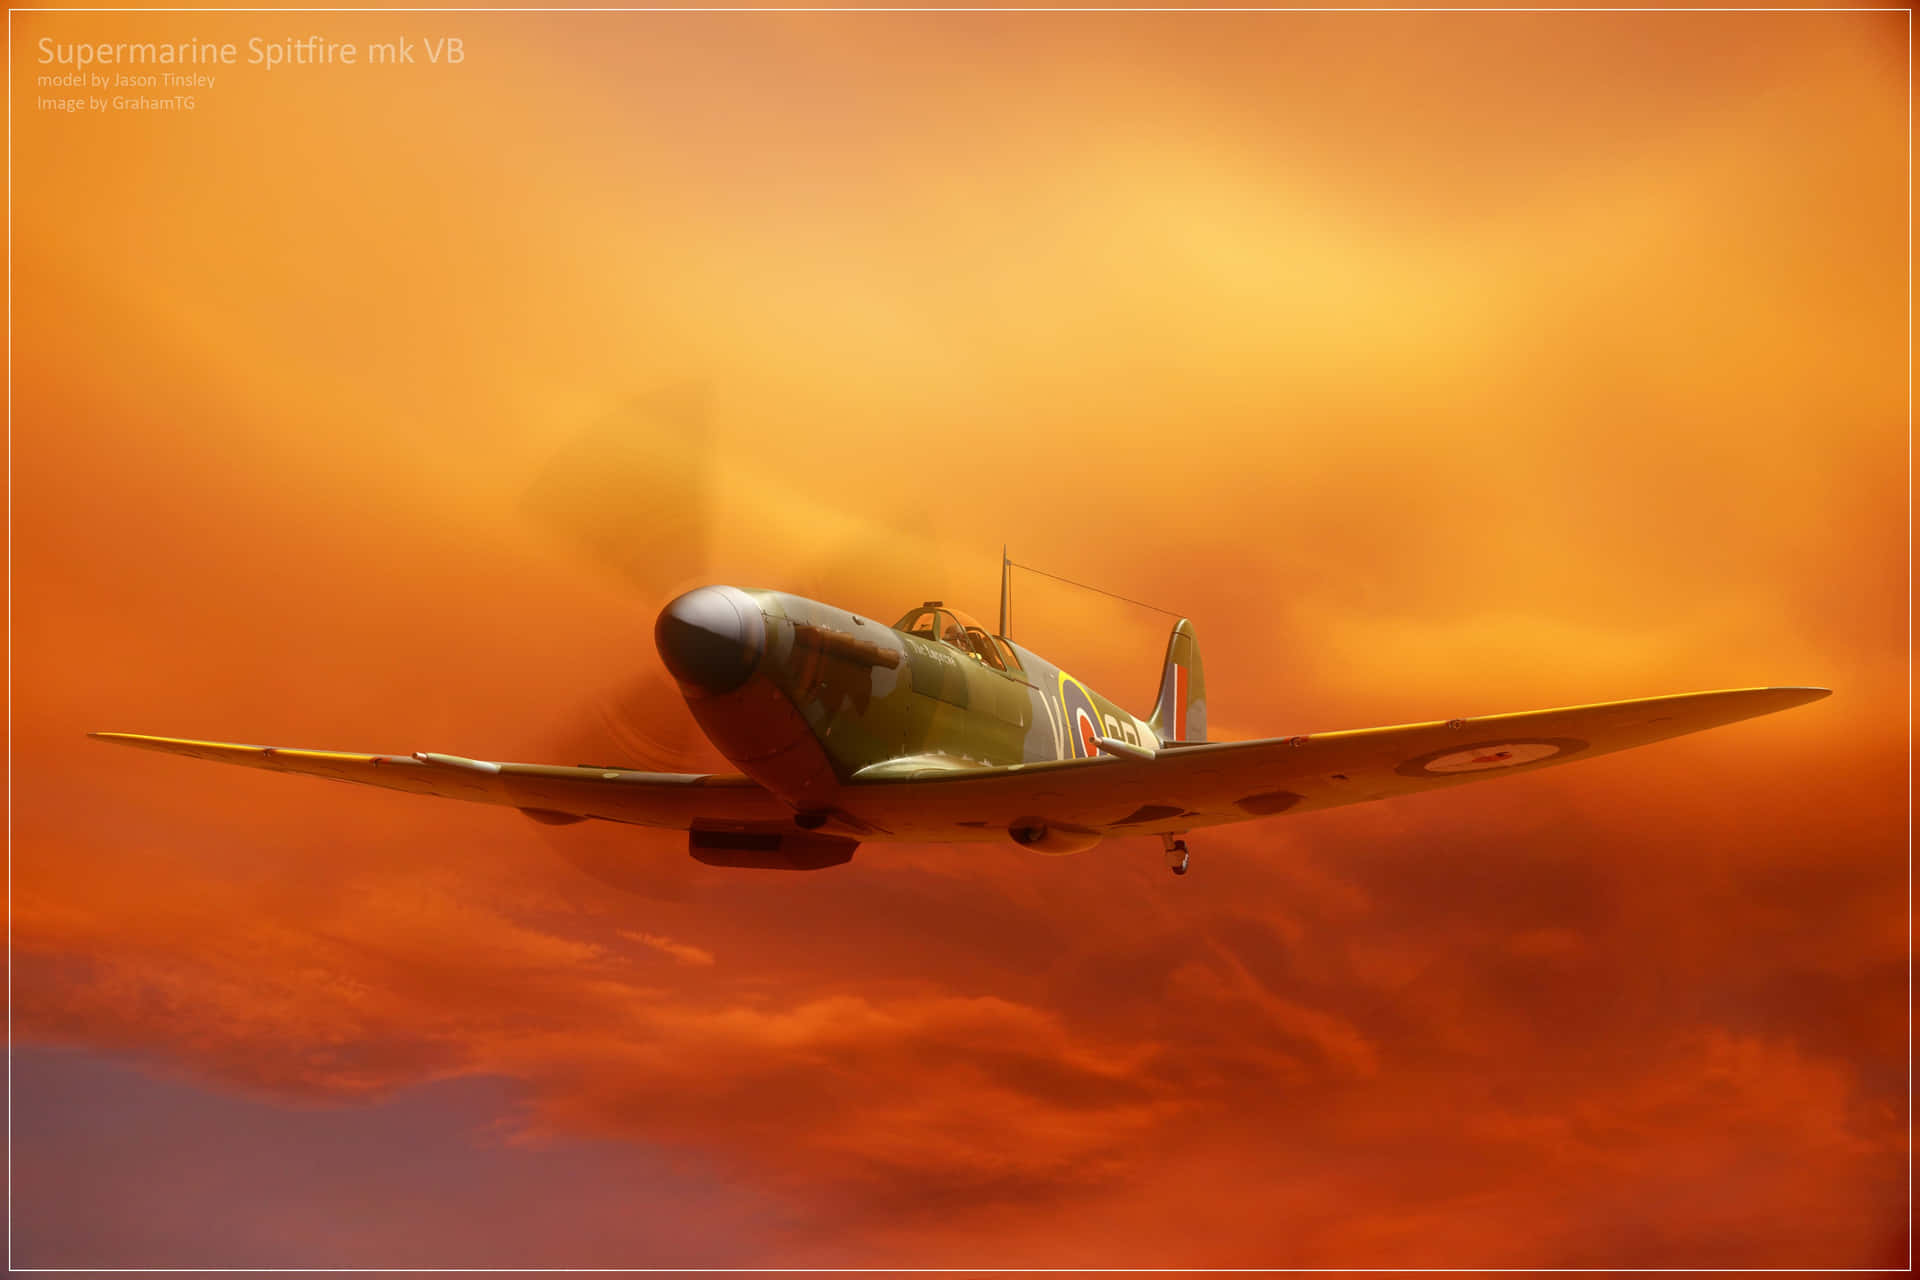 A Spitfire plane soaring through the air, representing triumph, courage and strength. Wallpaper